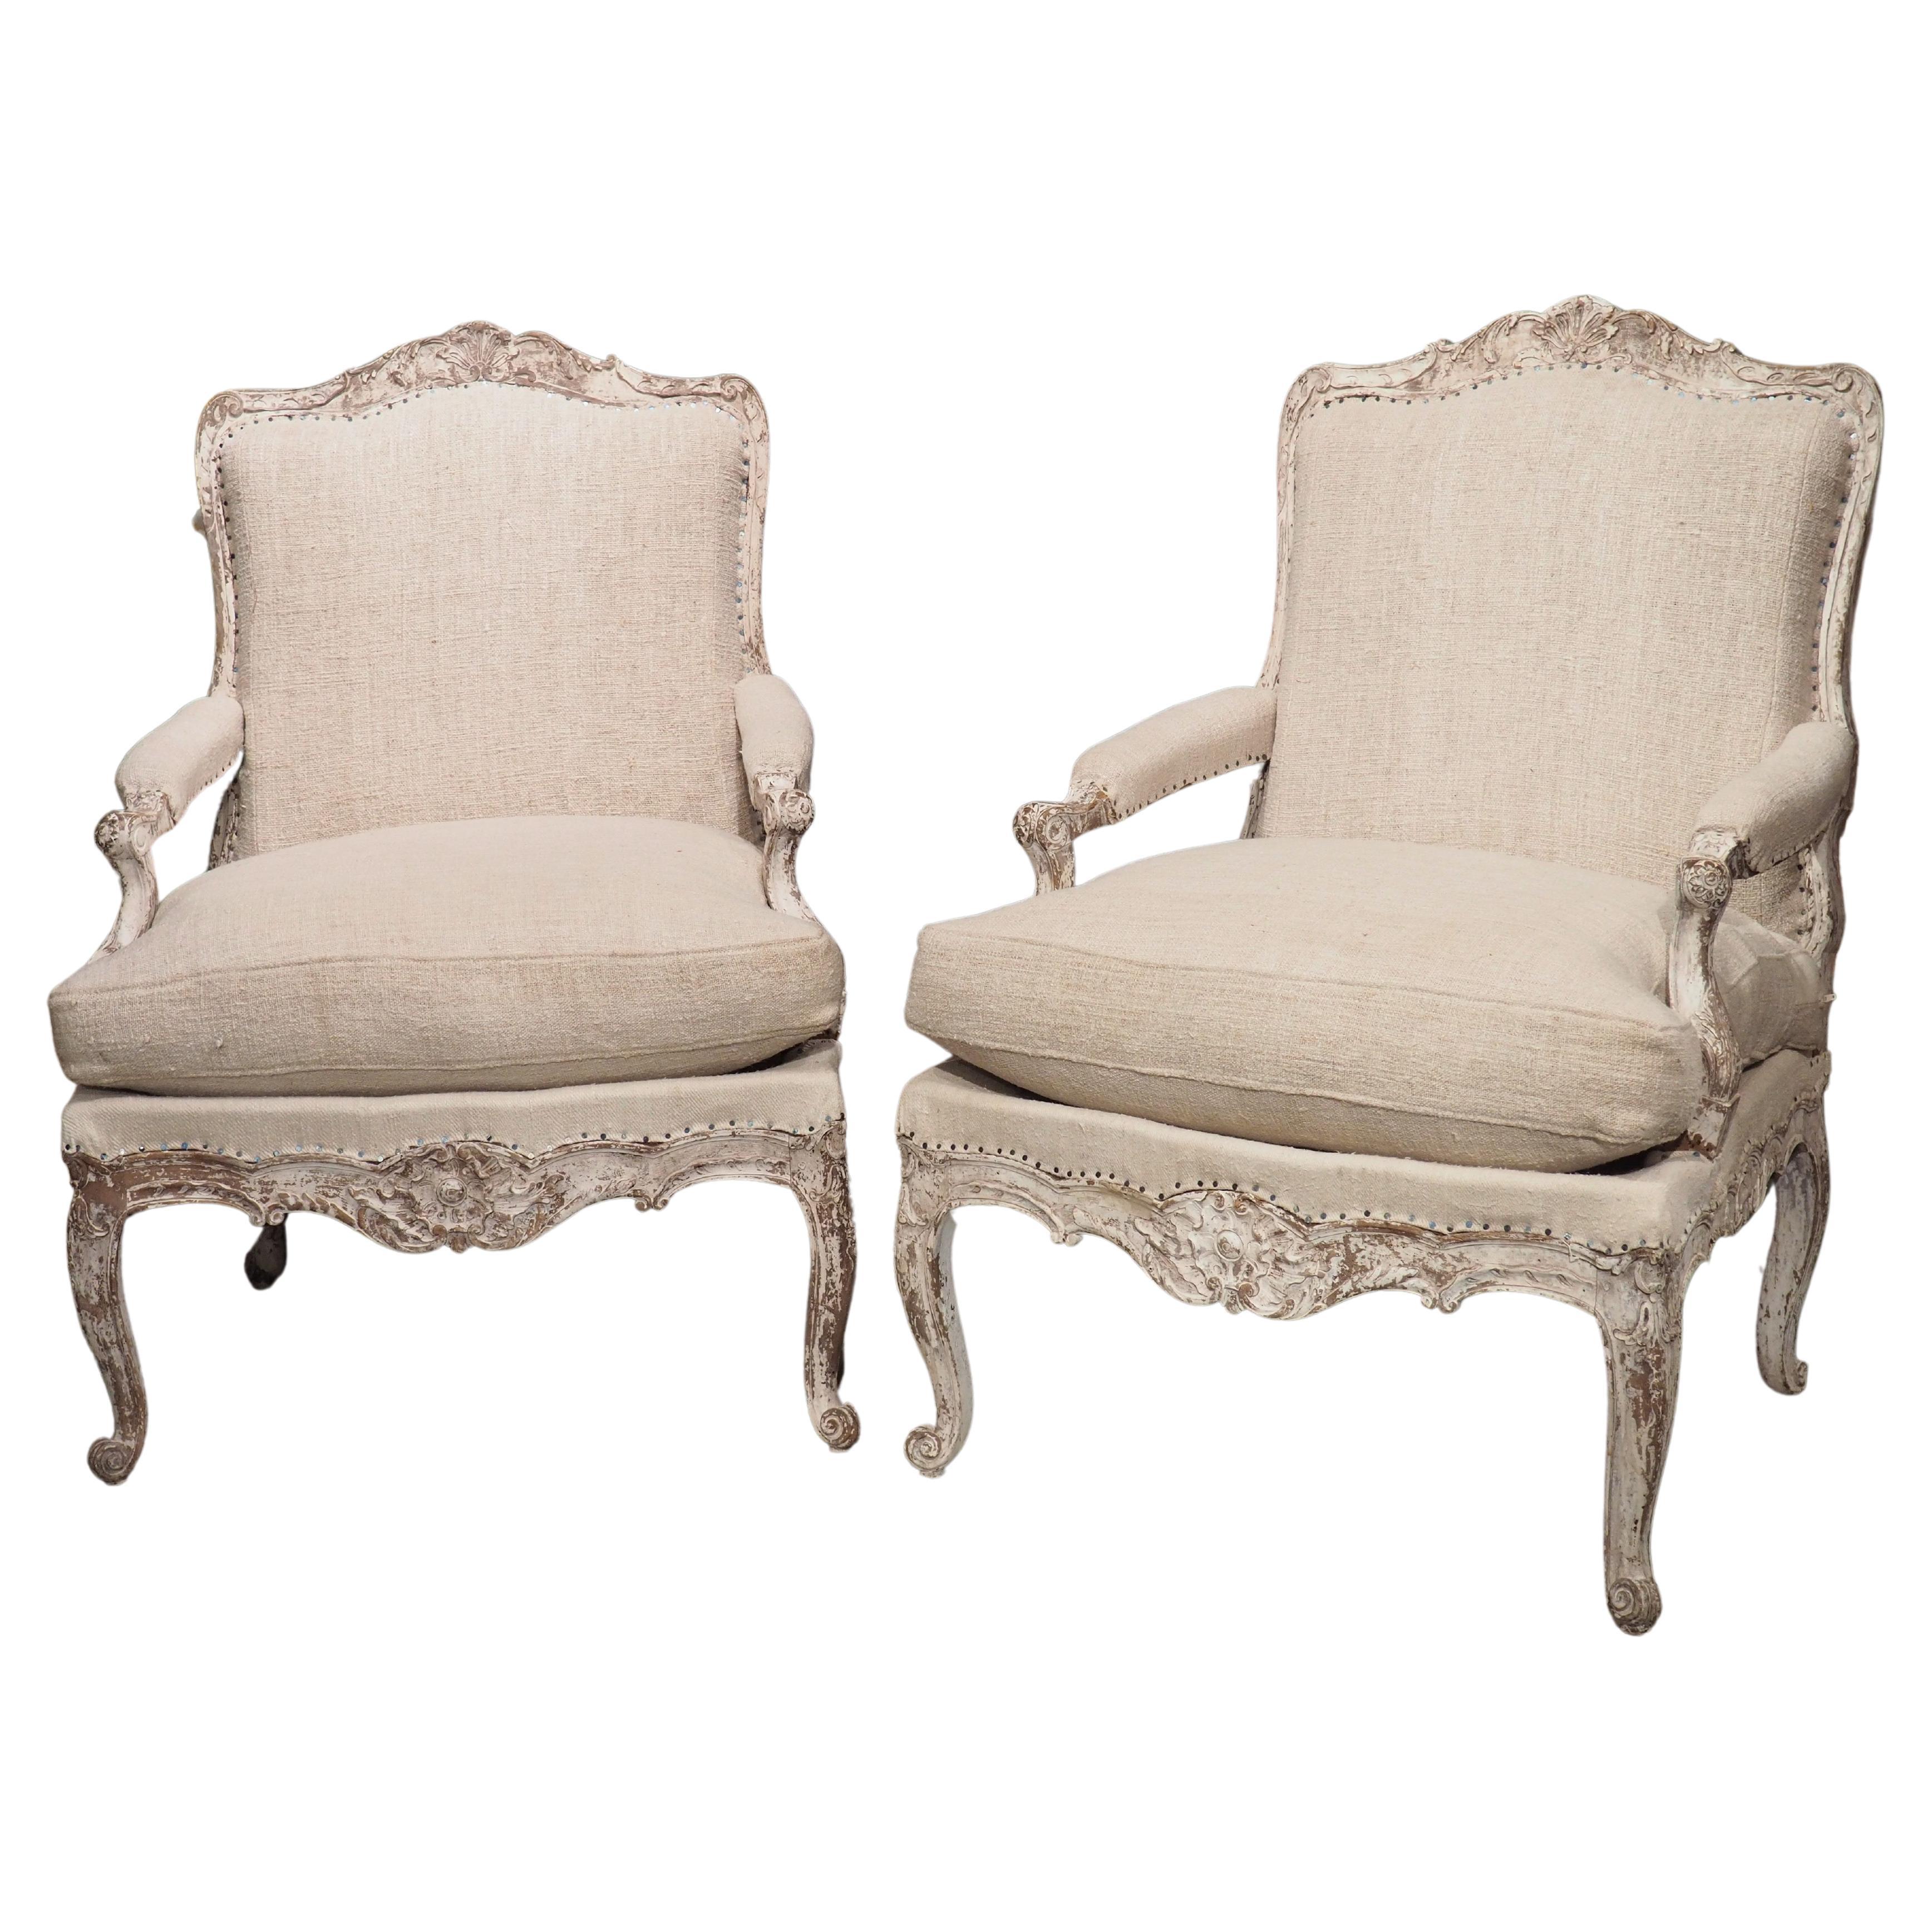 Pair of Painted and Distressed French Regence Style Fauteuil Armchairs, C. 1915